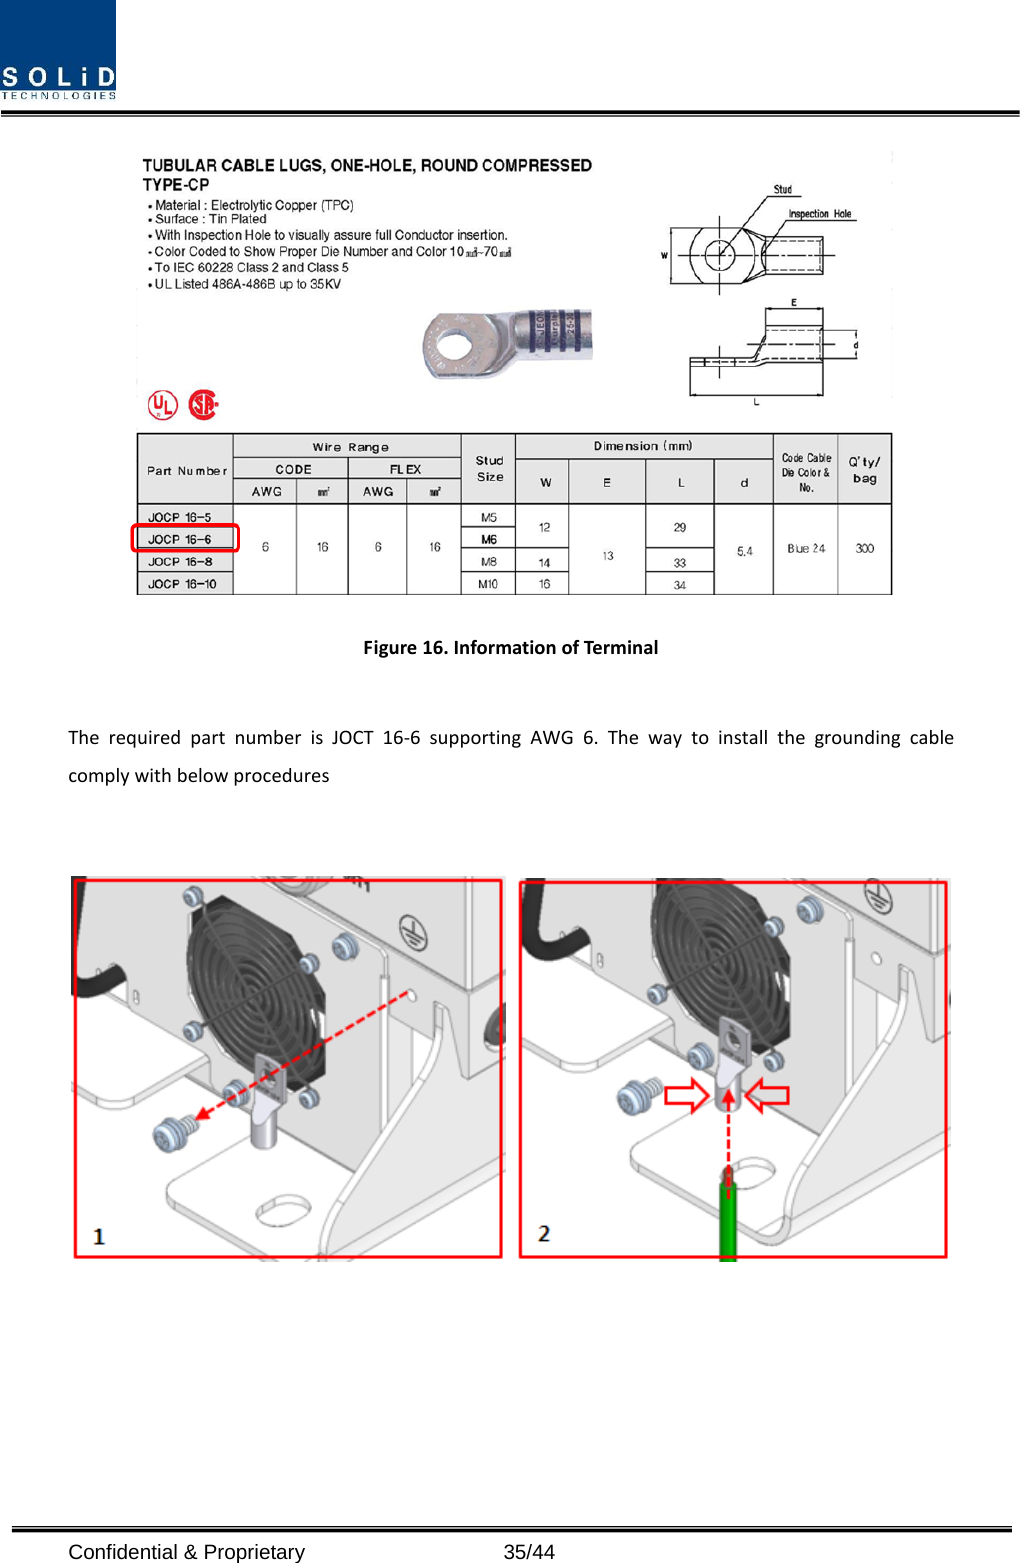   Figure 16. Information of Terminal  The required part number is JOCT 16-6 supporting AWG 6. The way to install the grounding cable comply with below procedures     Confidential &amp; Proprietary                   35/44 